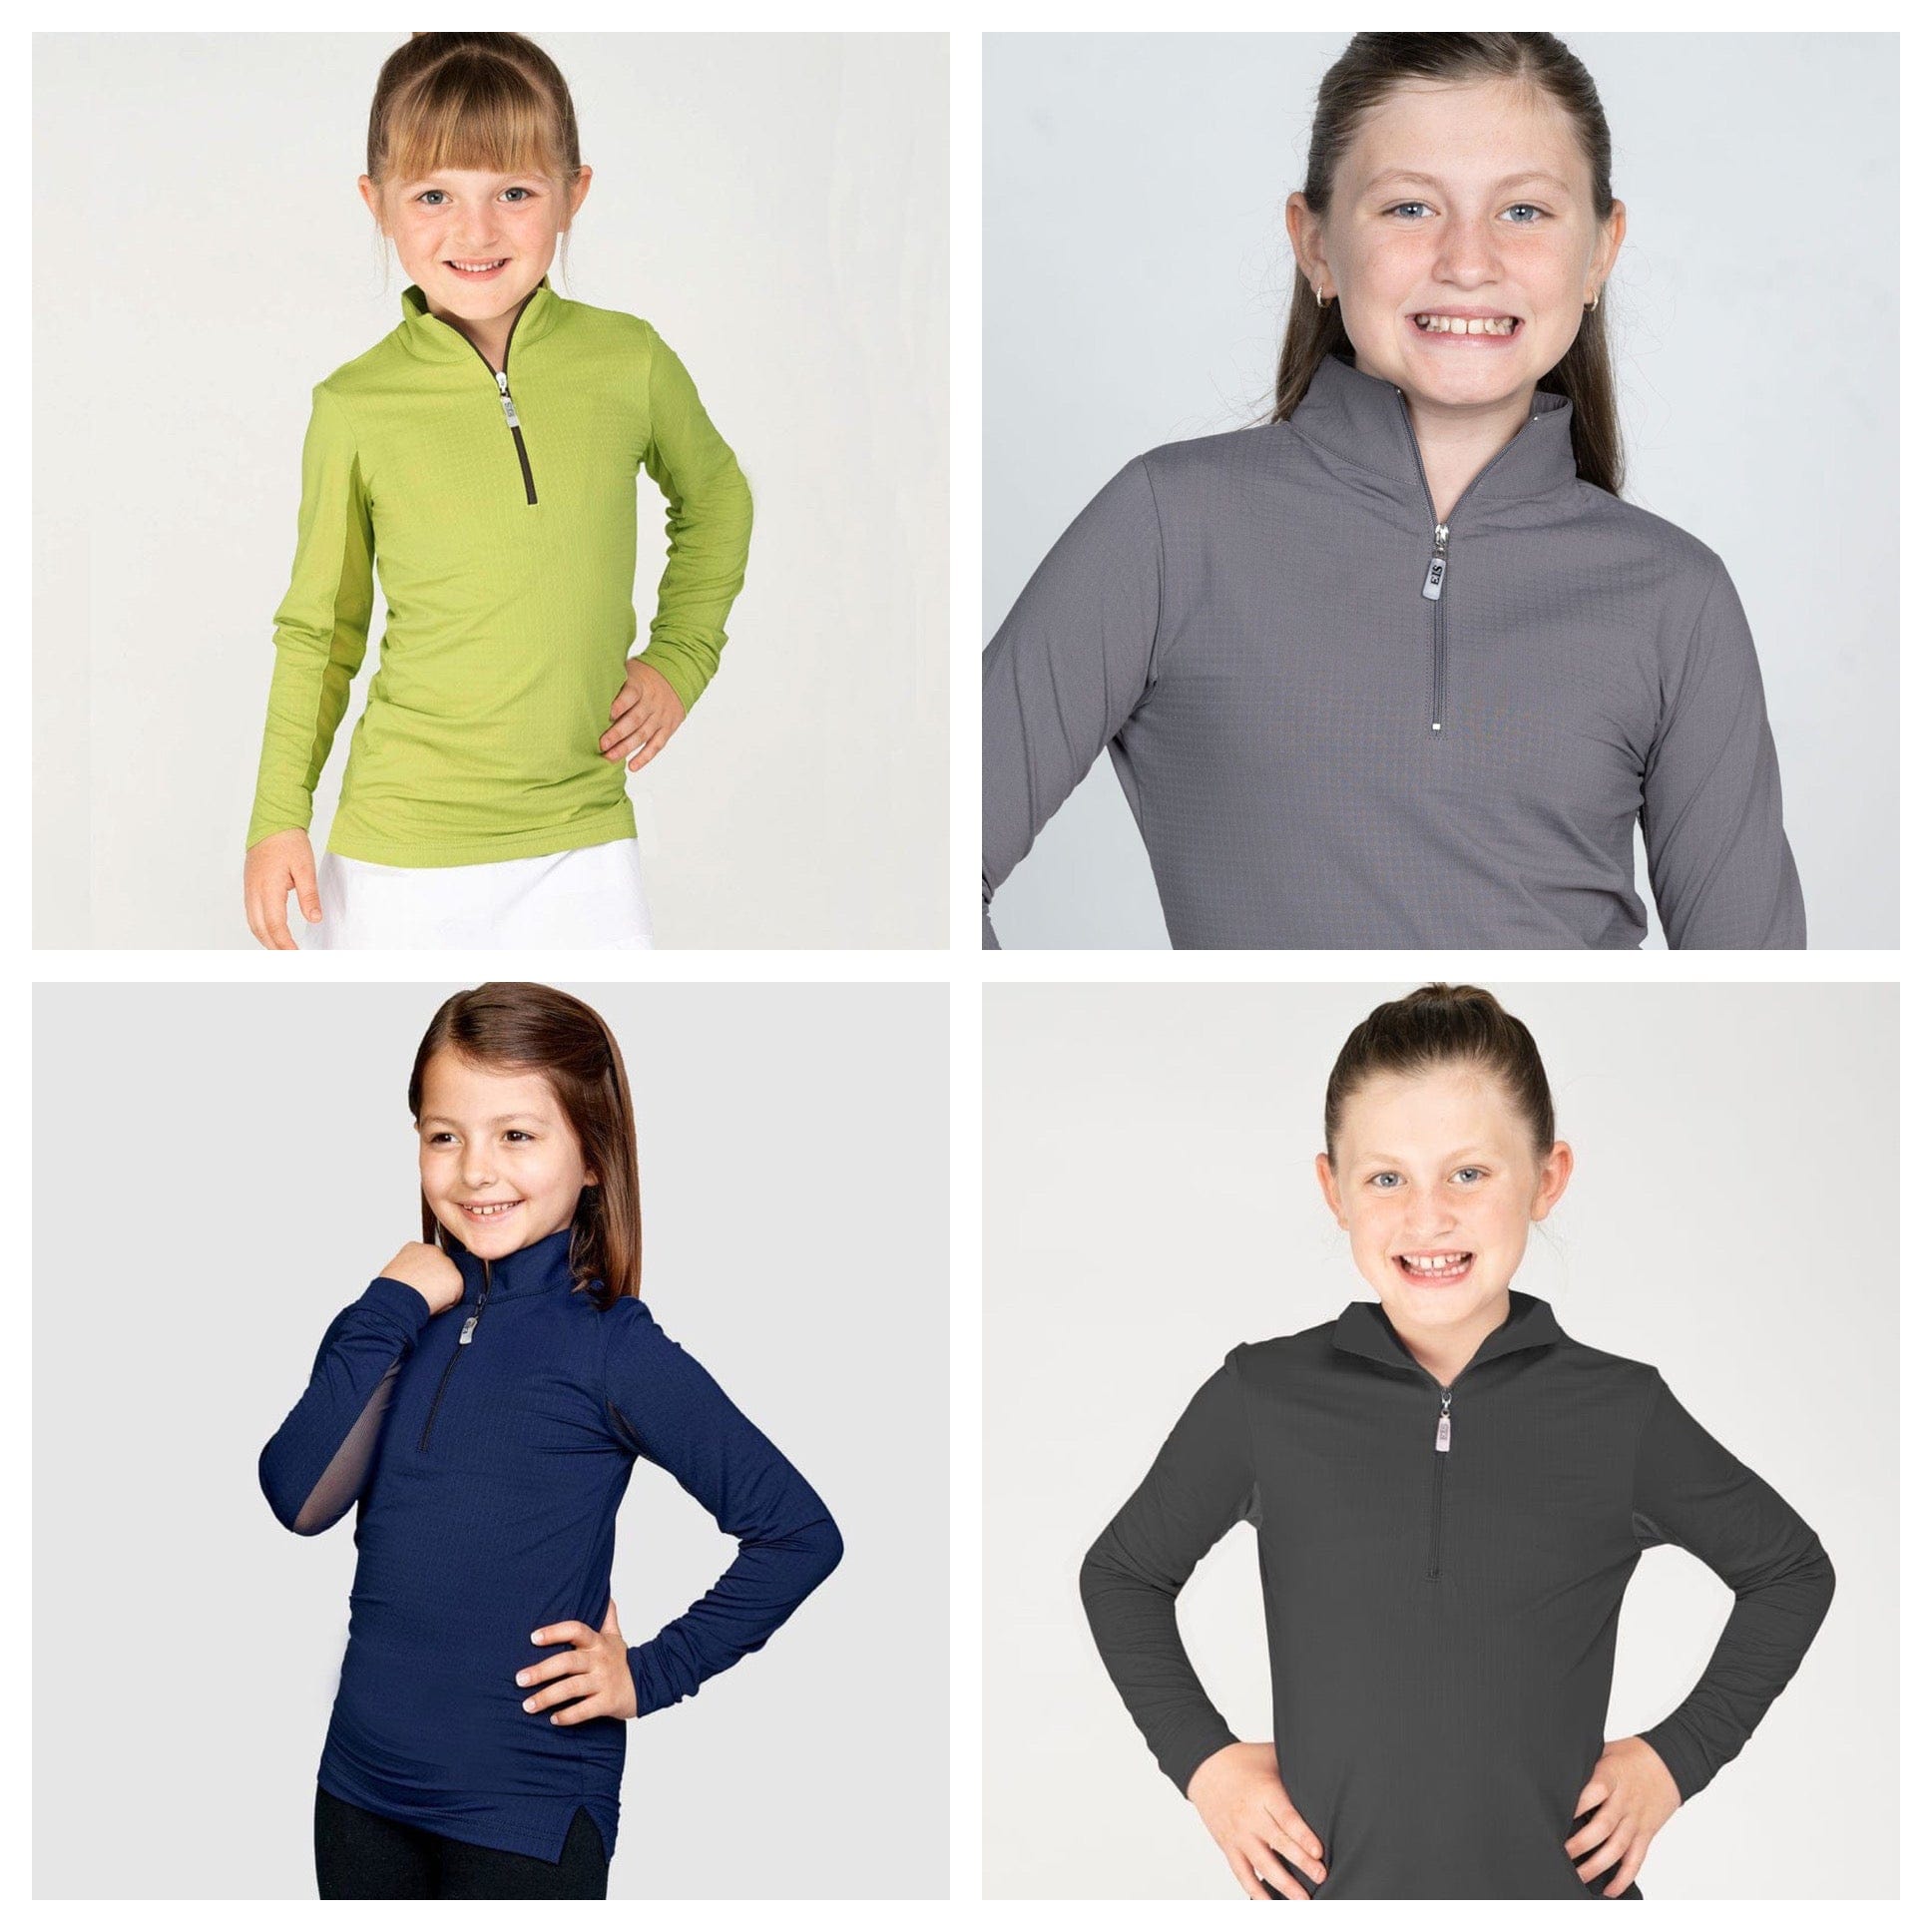 EIS Youth Shirt EIS- Sun Shirts Youth X Small 2-4 equestrian team apparel online tack store mobile tack store custom farm apparel custom show stable clothing equestrian lifestyle horse show clothing riding clothes ETA Kids Equestrian Fashion | EIS Sun Shirts horses equestrian tack store